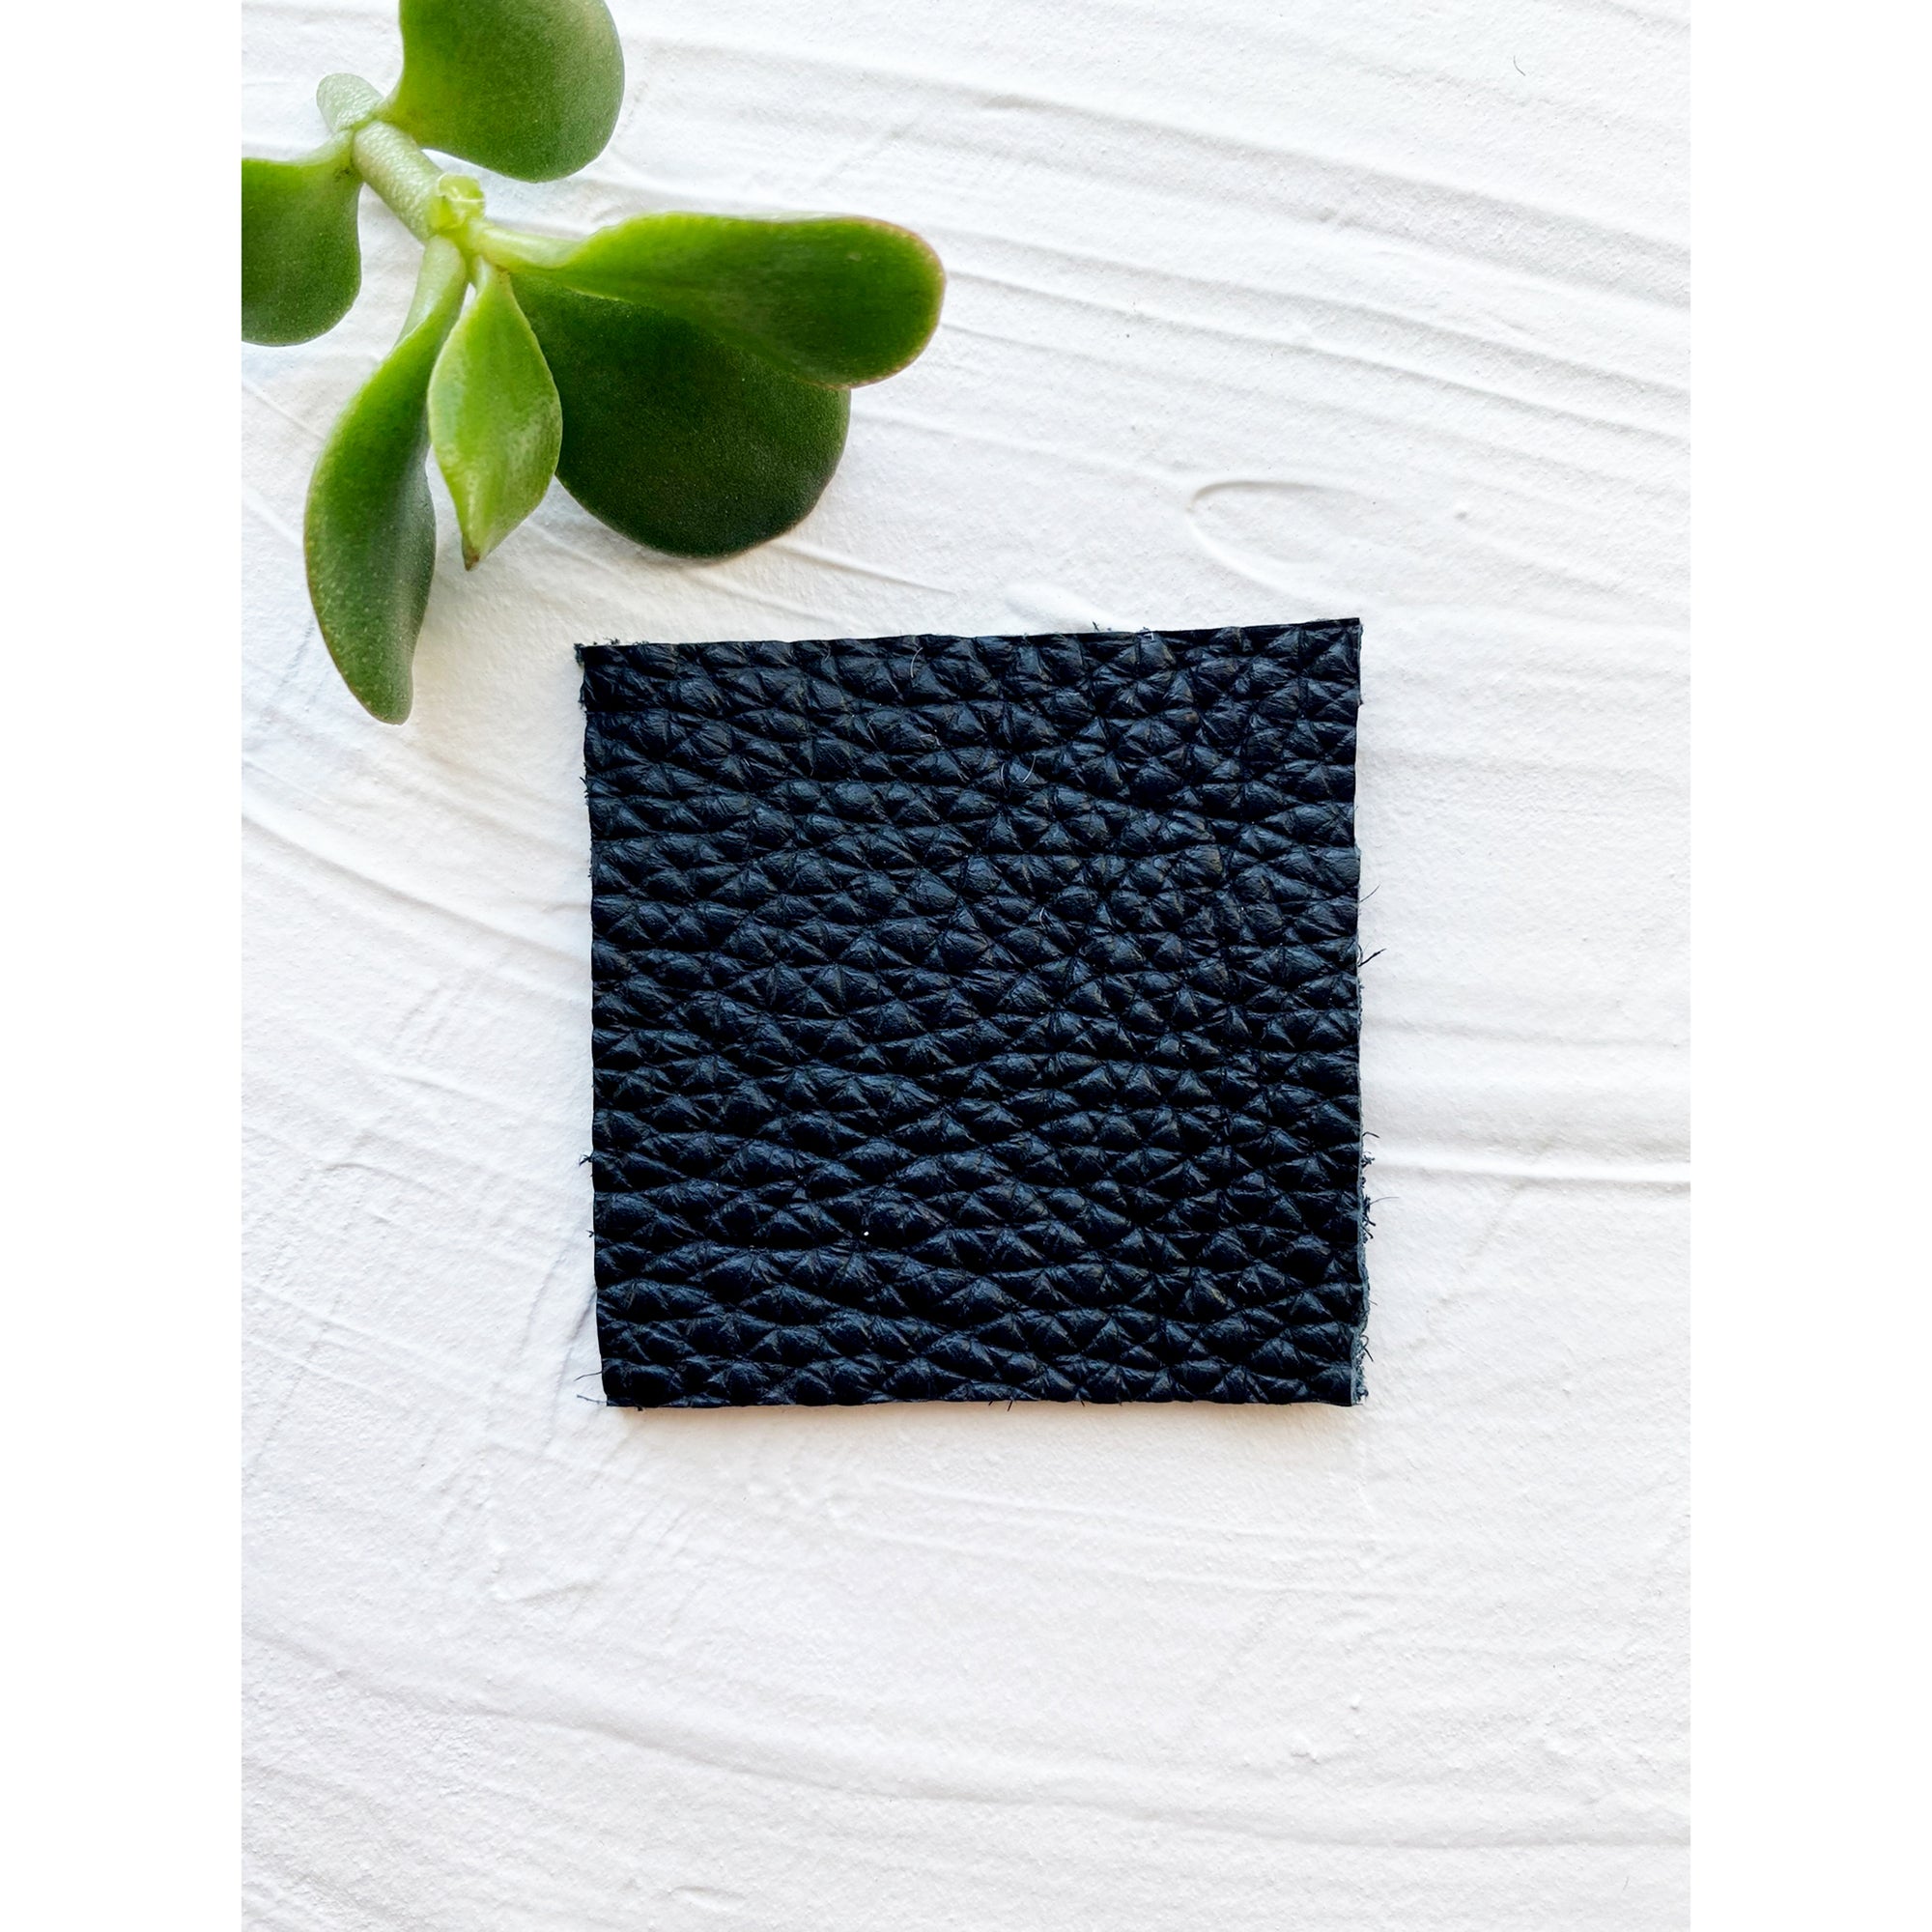 Black Pebbled Leather Swatch